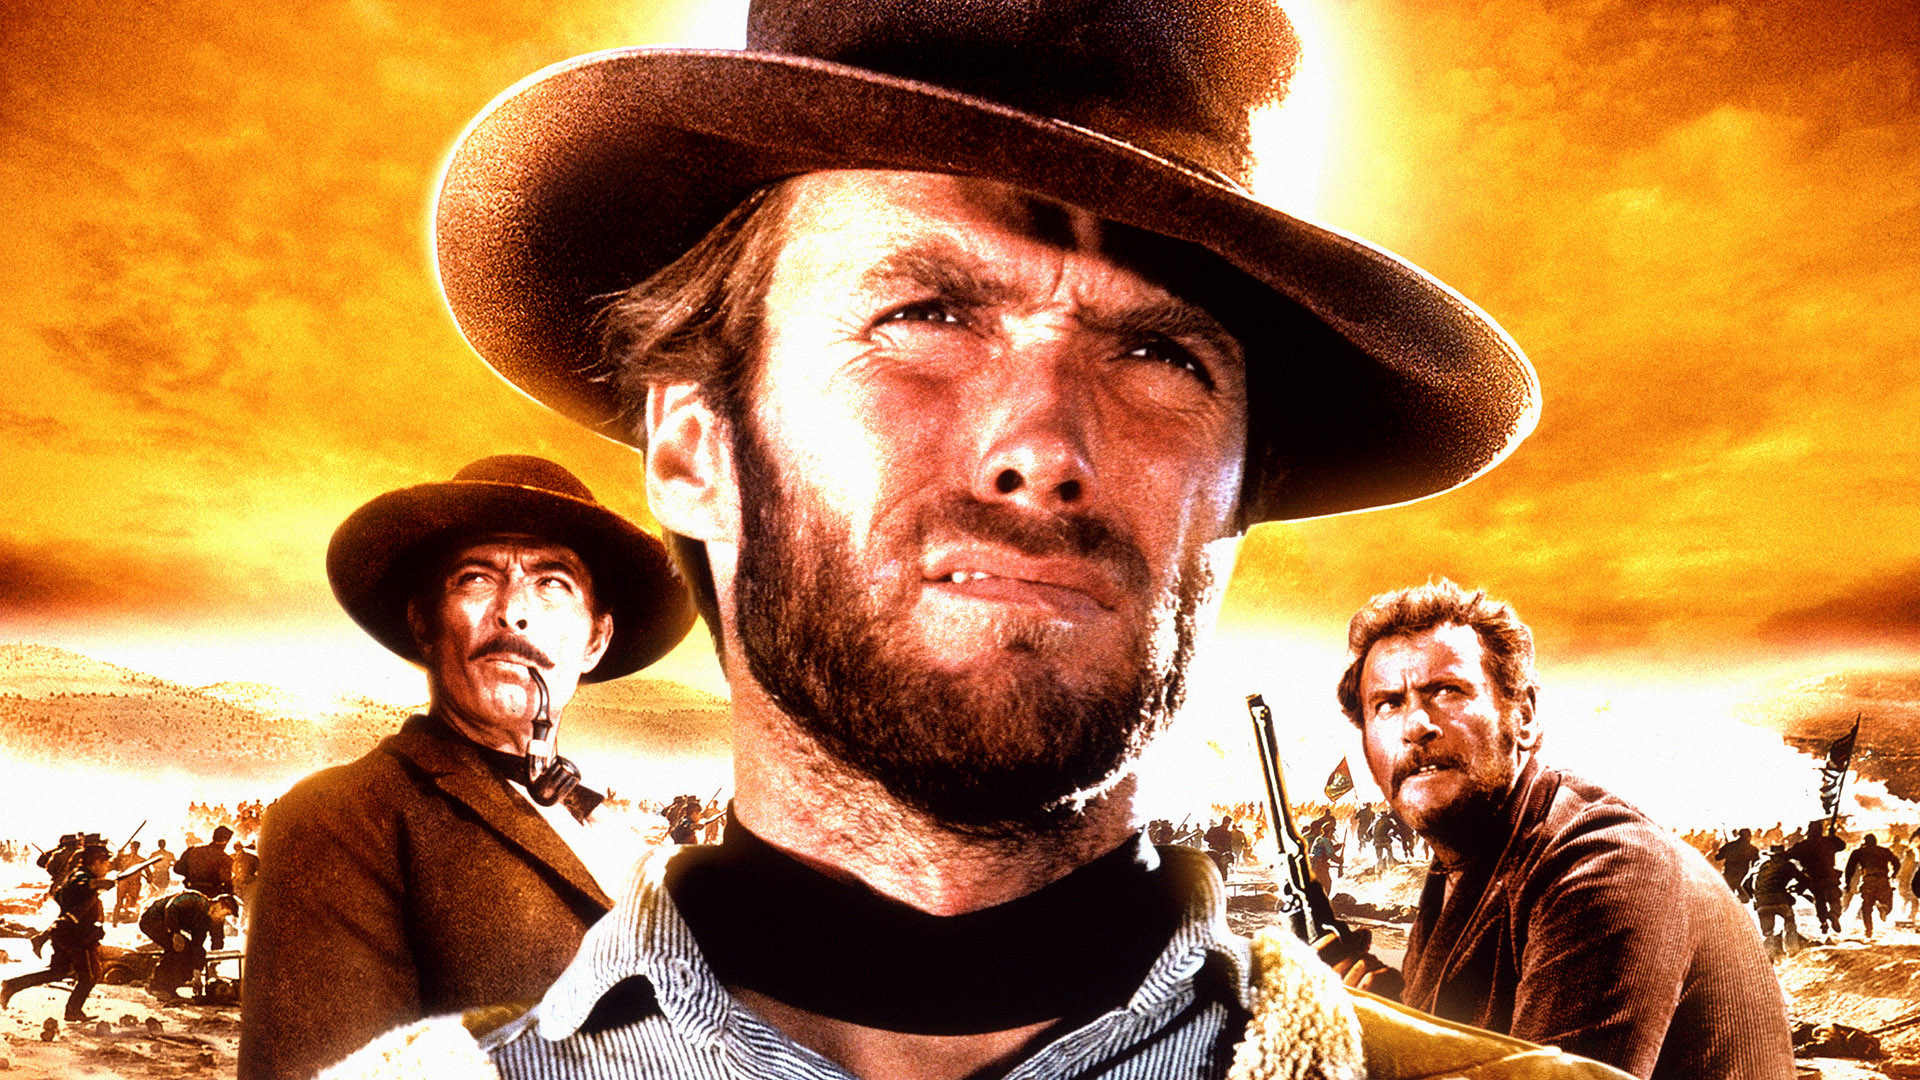 Movie The Good, the Bad and the Ugly HD Wallpaper Background Image. 